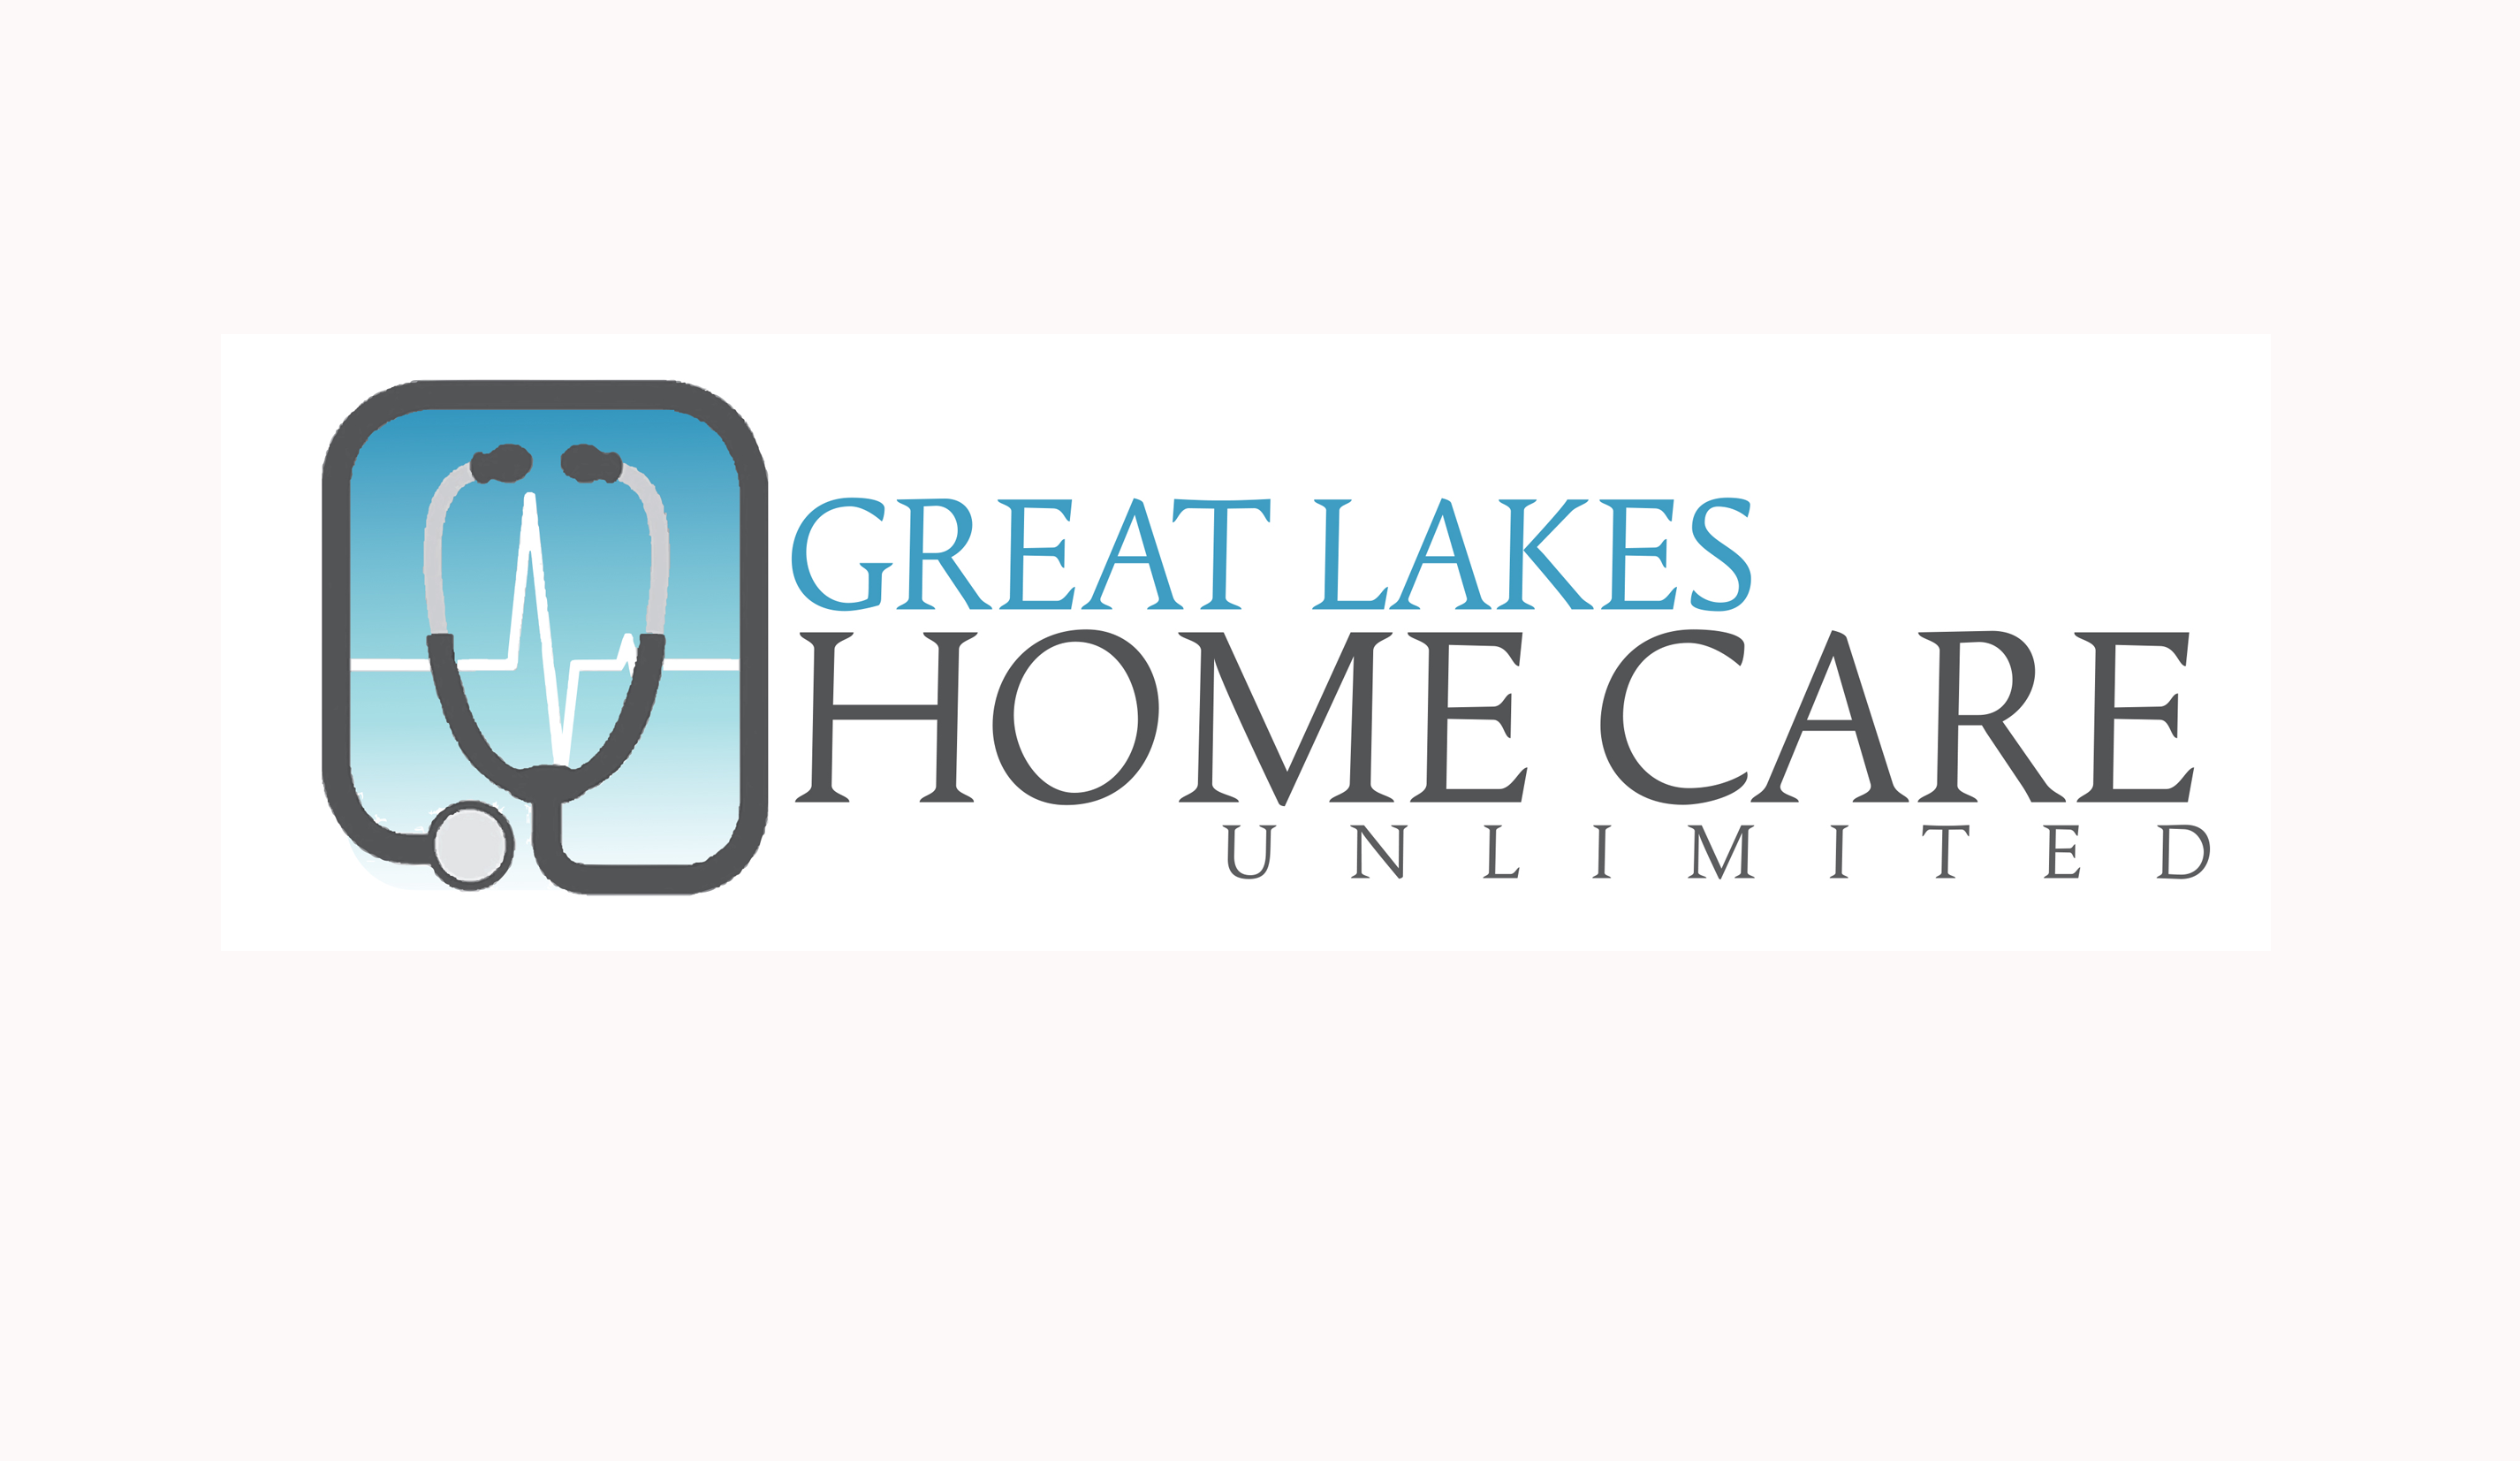 Great Lakes Home Care Unlimited image